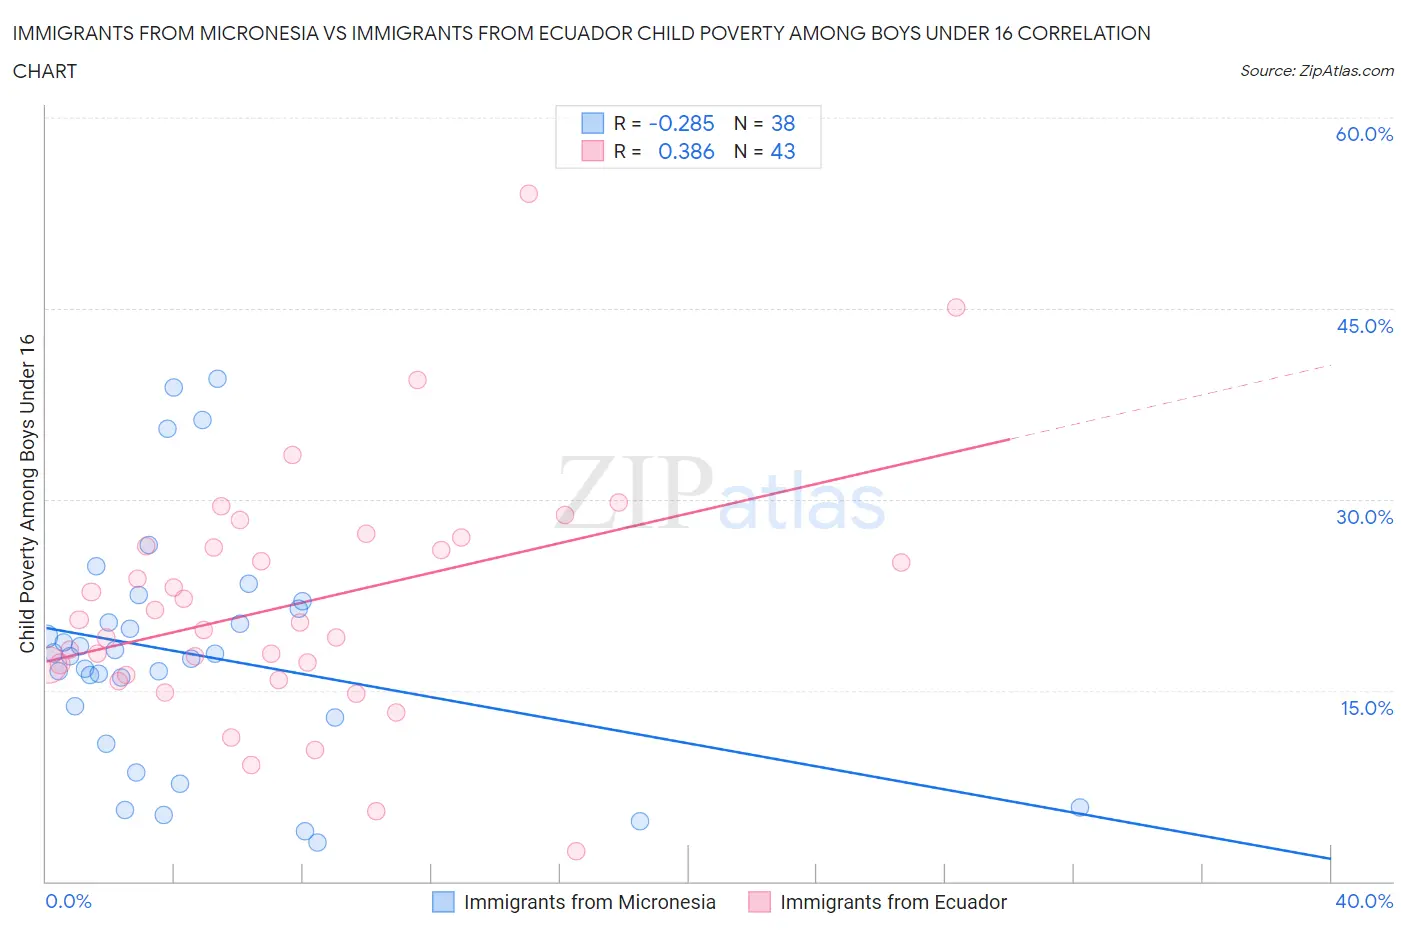 Immigrants from Micronesia vs Immigrants from Ecuador Child Poverty Among Boys Under 16